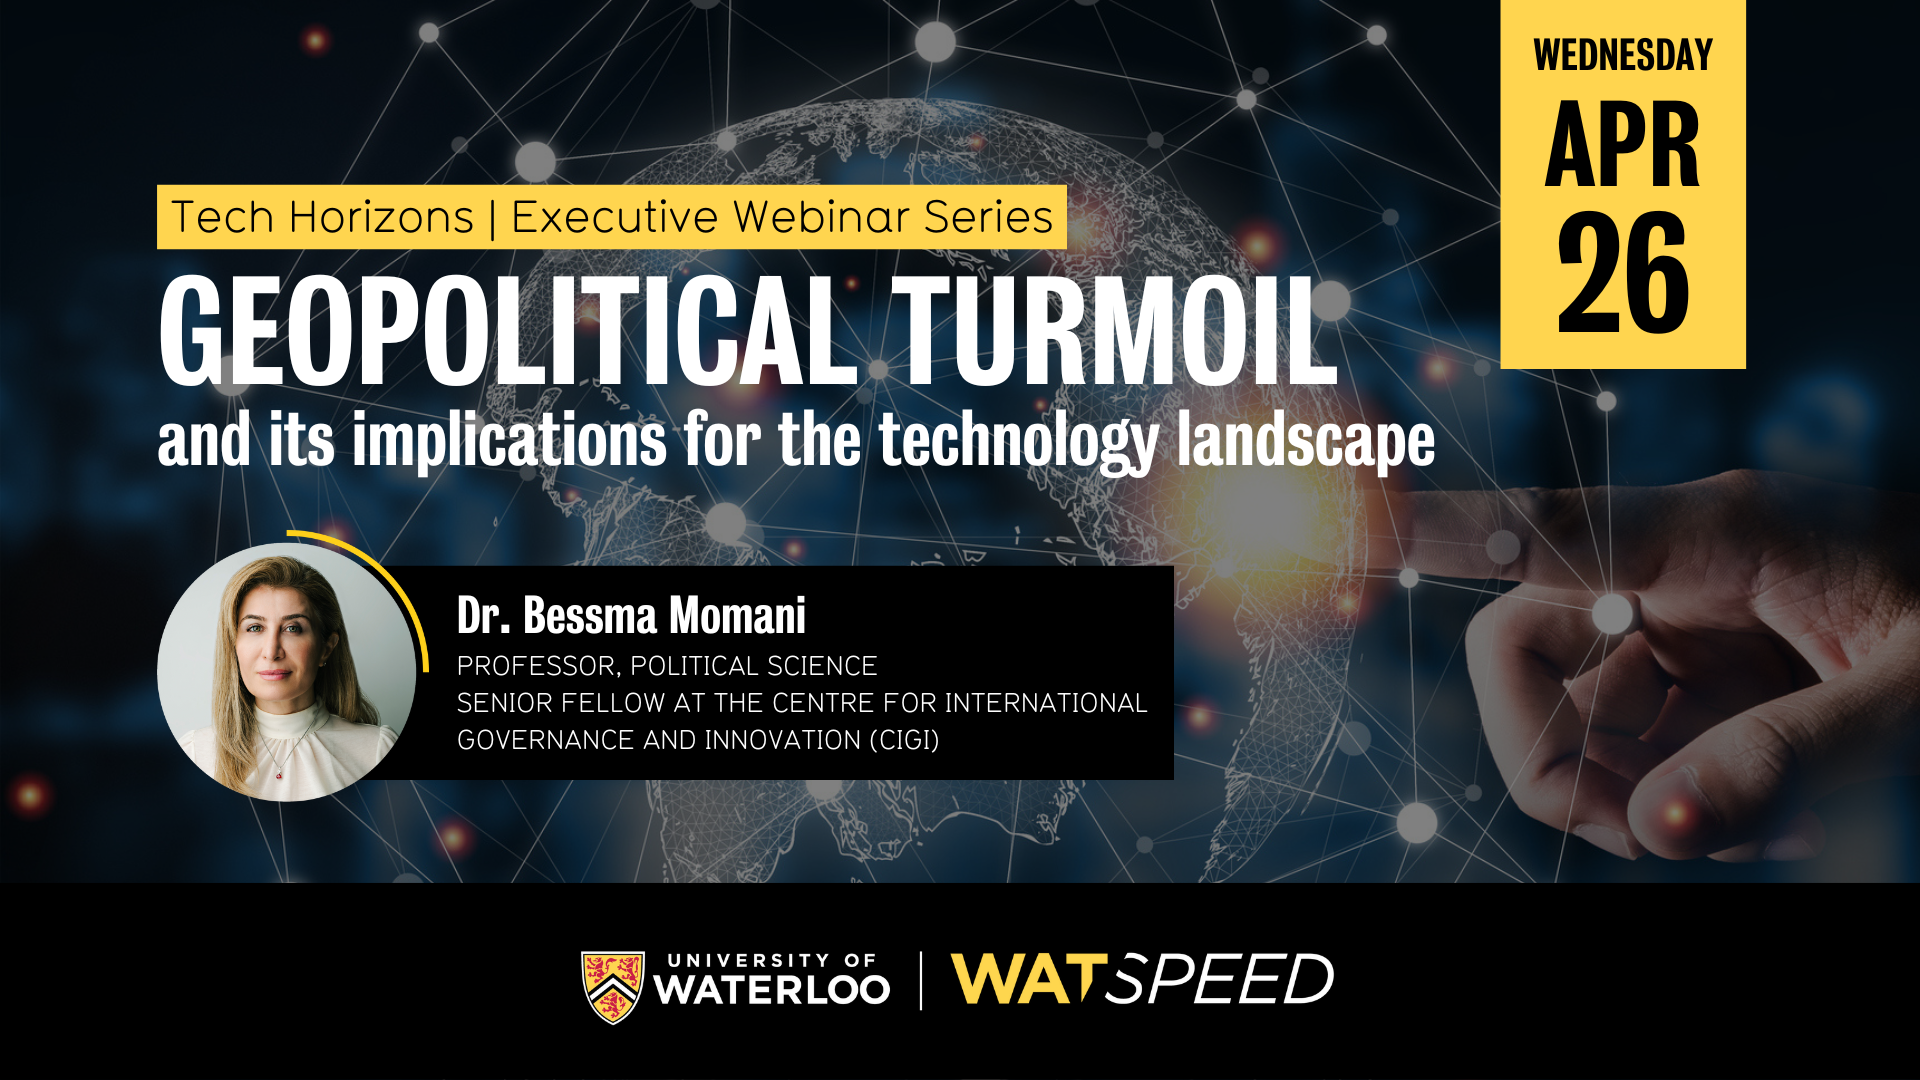 Executive webinar: Geopolitical turmoil and its implications for the technology landscape